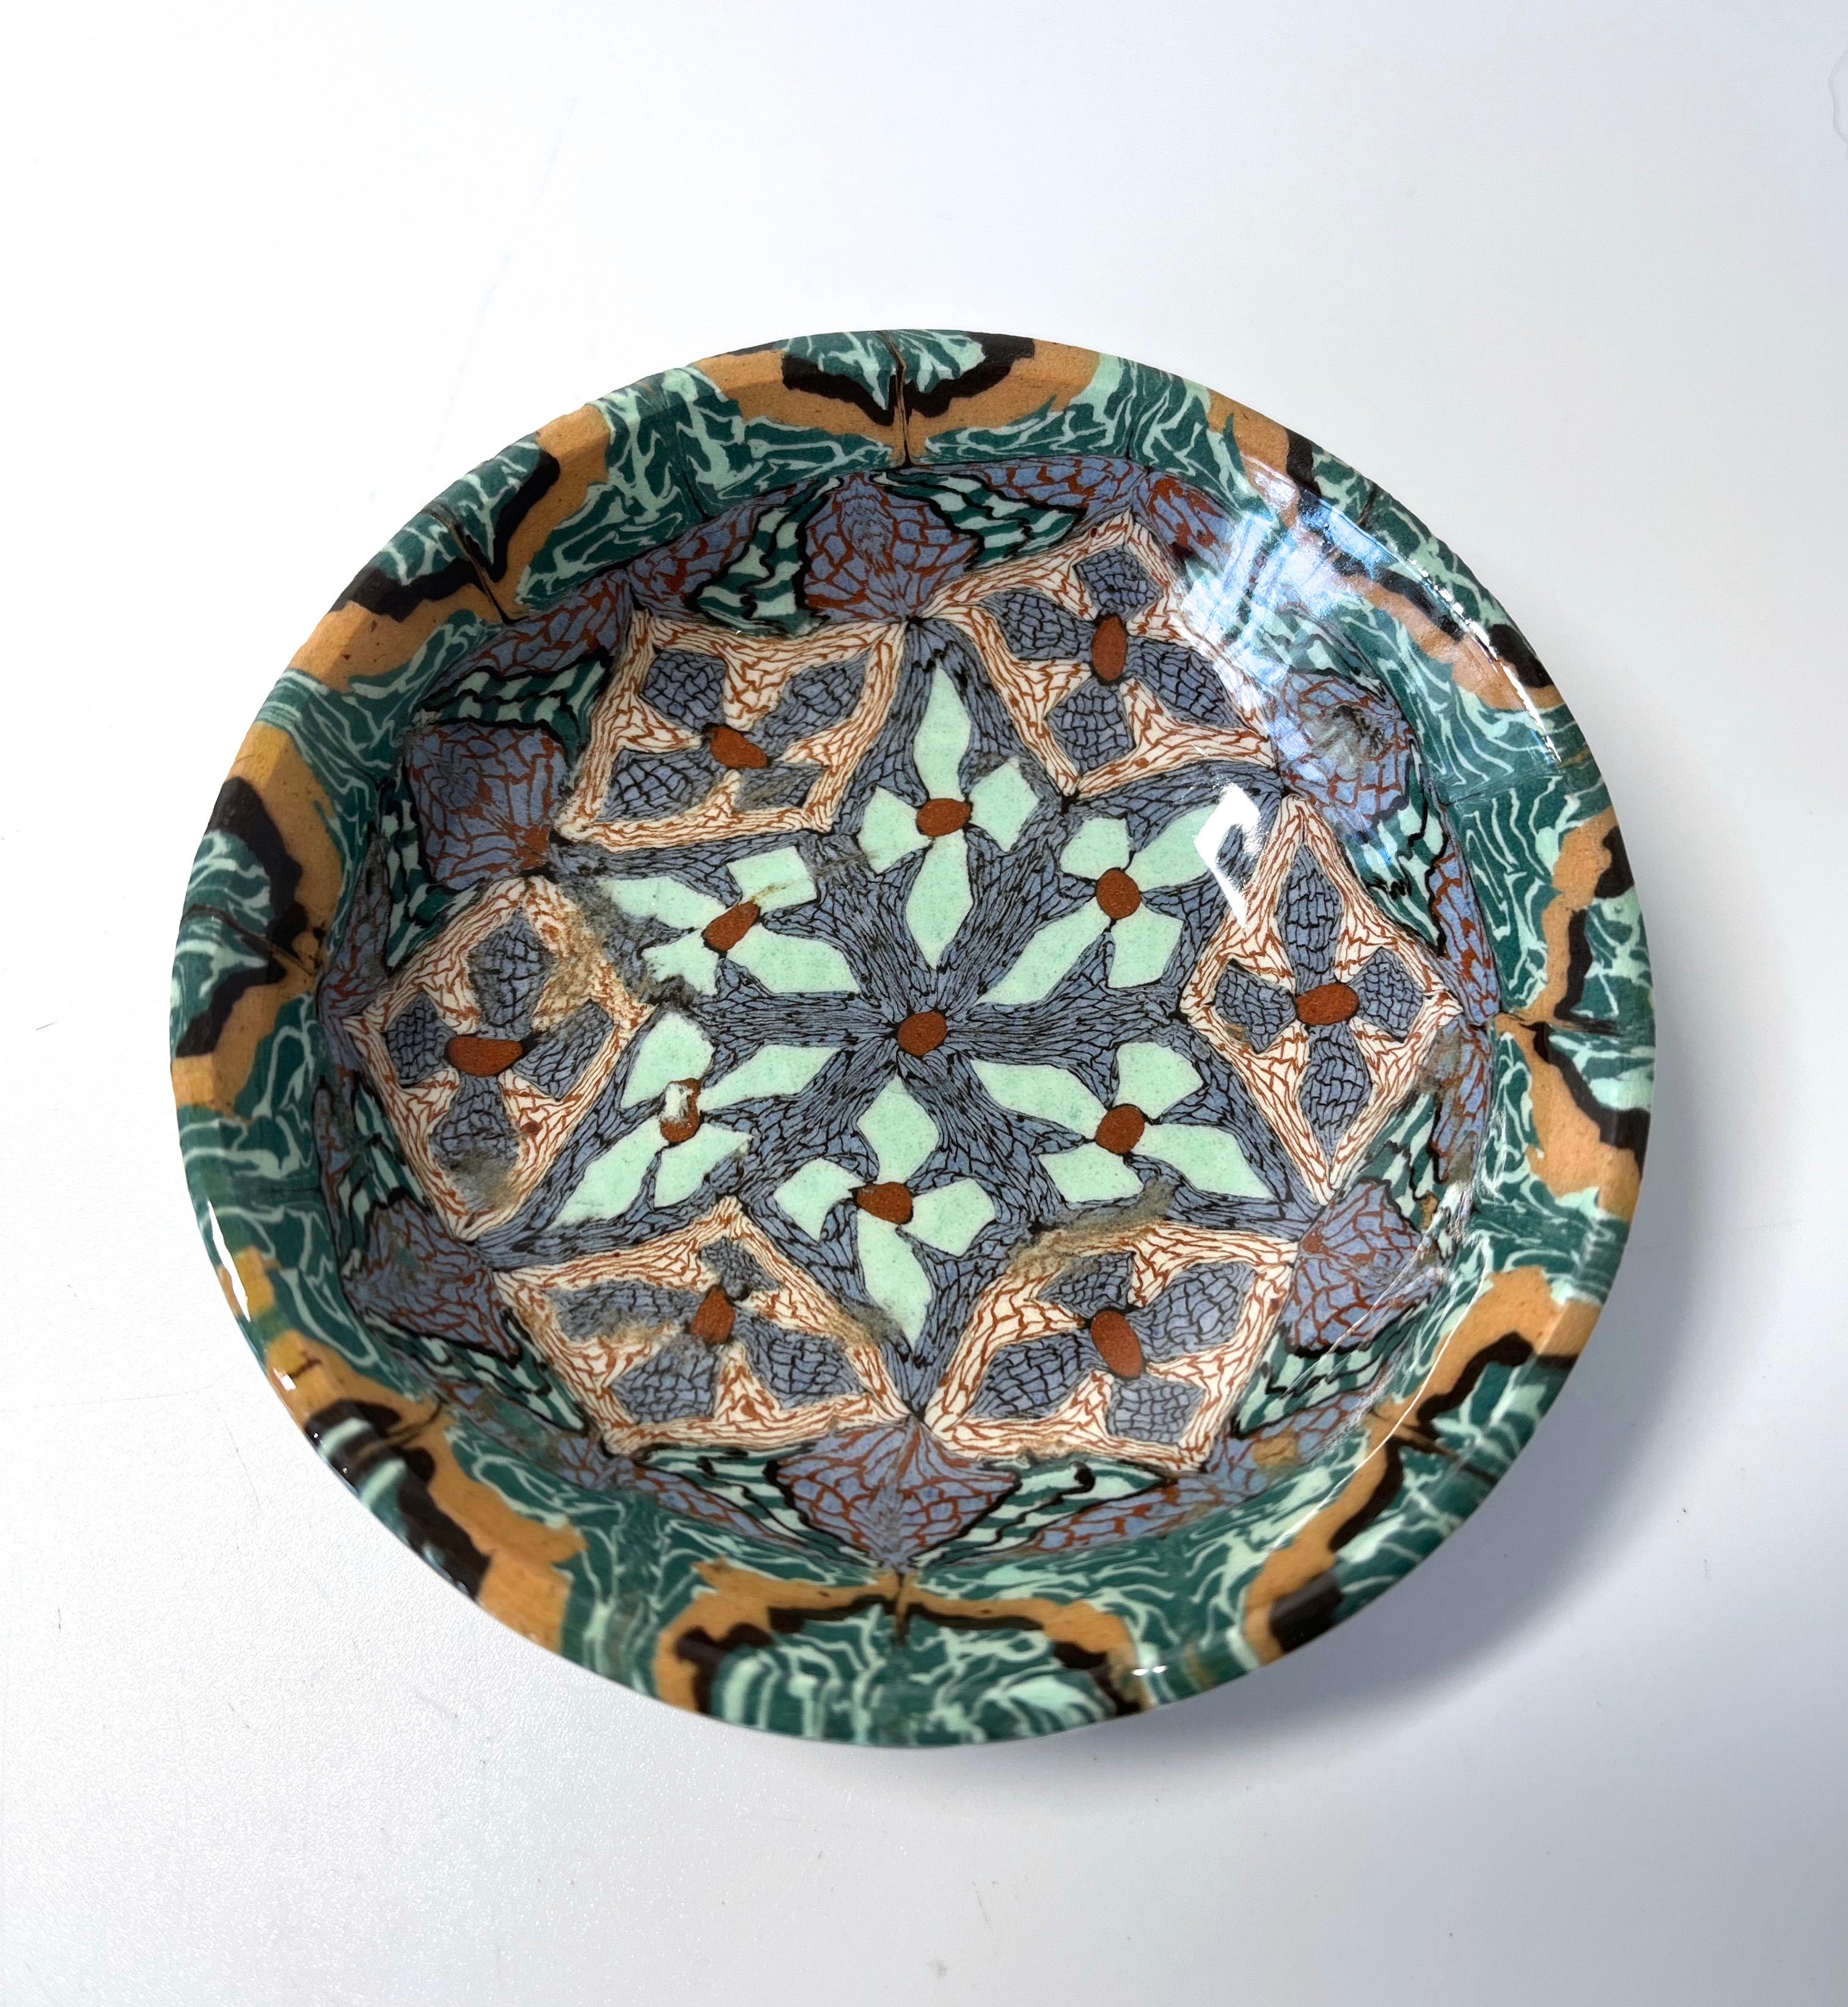 Delightful ceramic pin dish from Jean Gerbino for Vallauris, France.
A perfect introduction to the master ceramicist Jean Gerbino
Circa 1960's
Height 1 inch, Diameter 3.75 inch, 
In excellent condition. 
Wear consistent with age and use